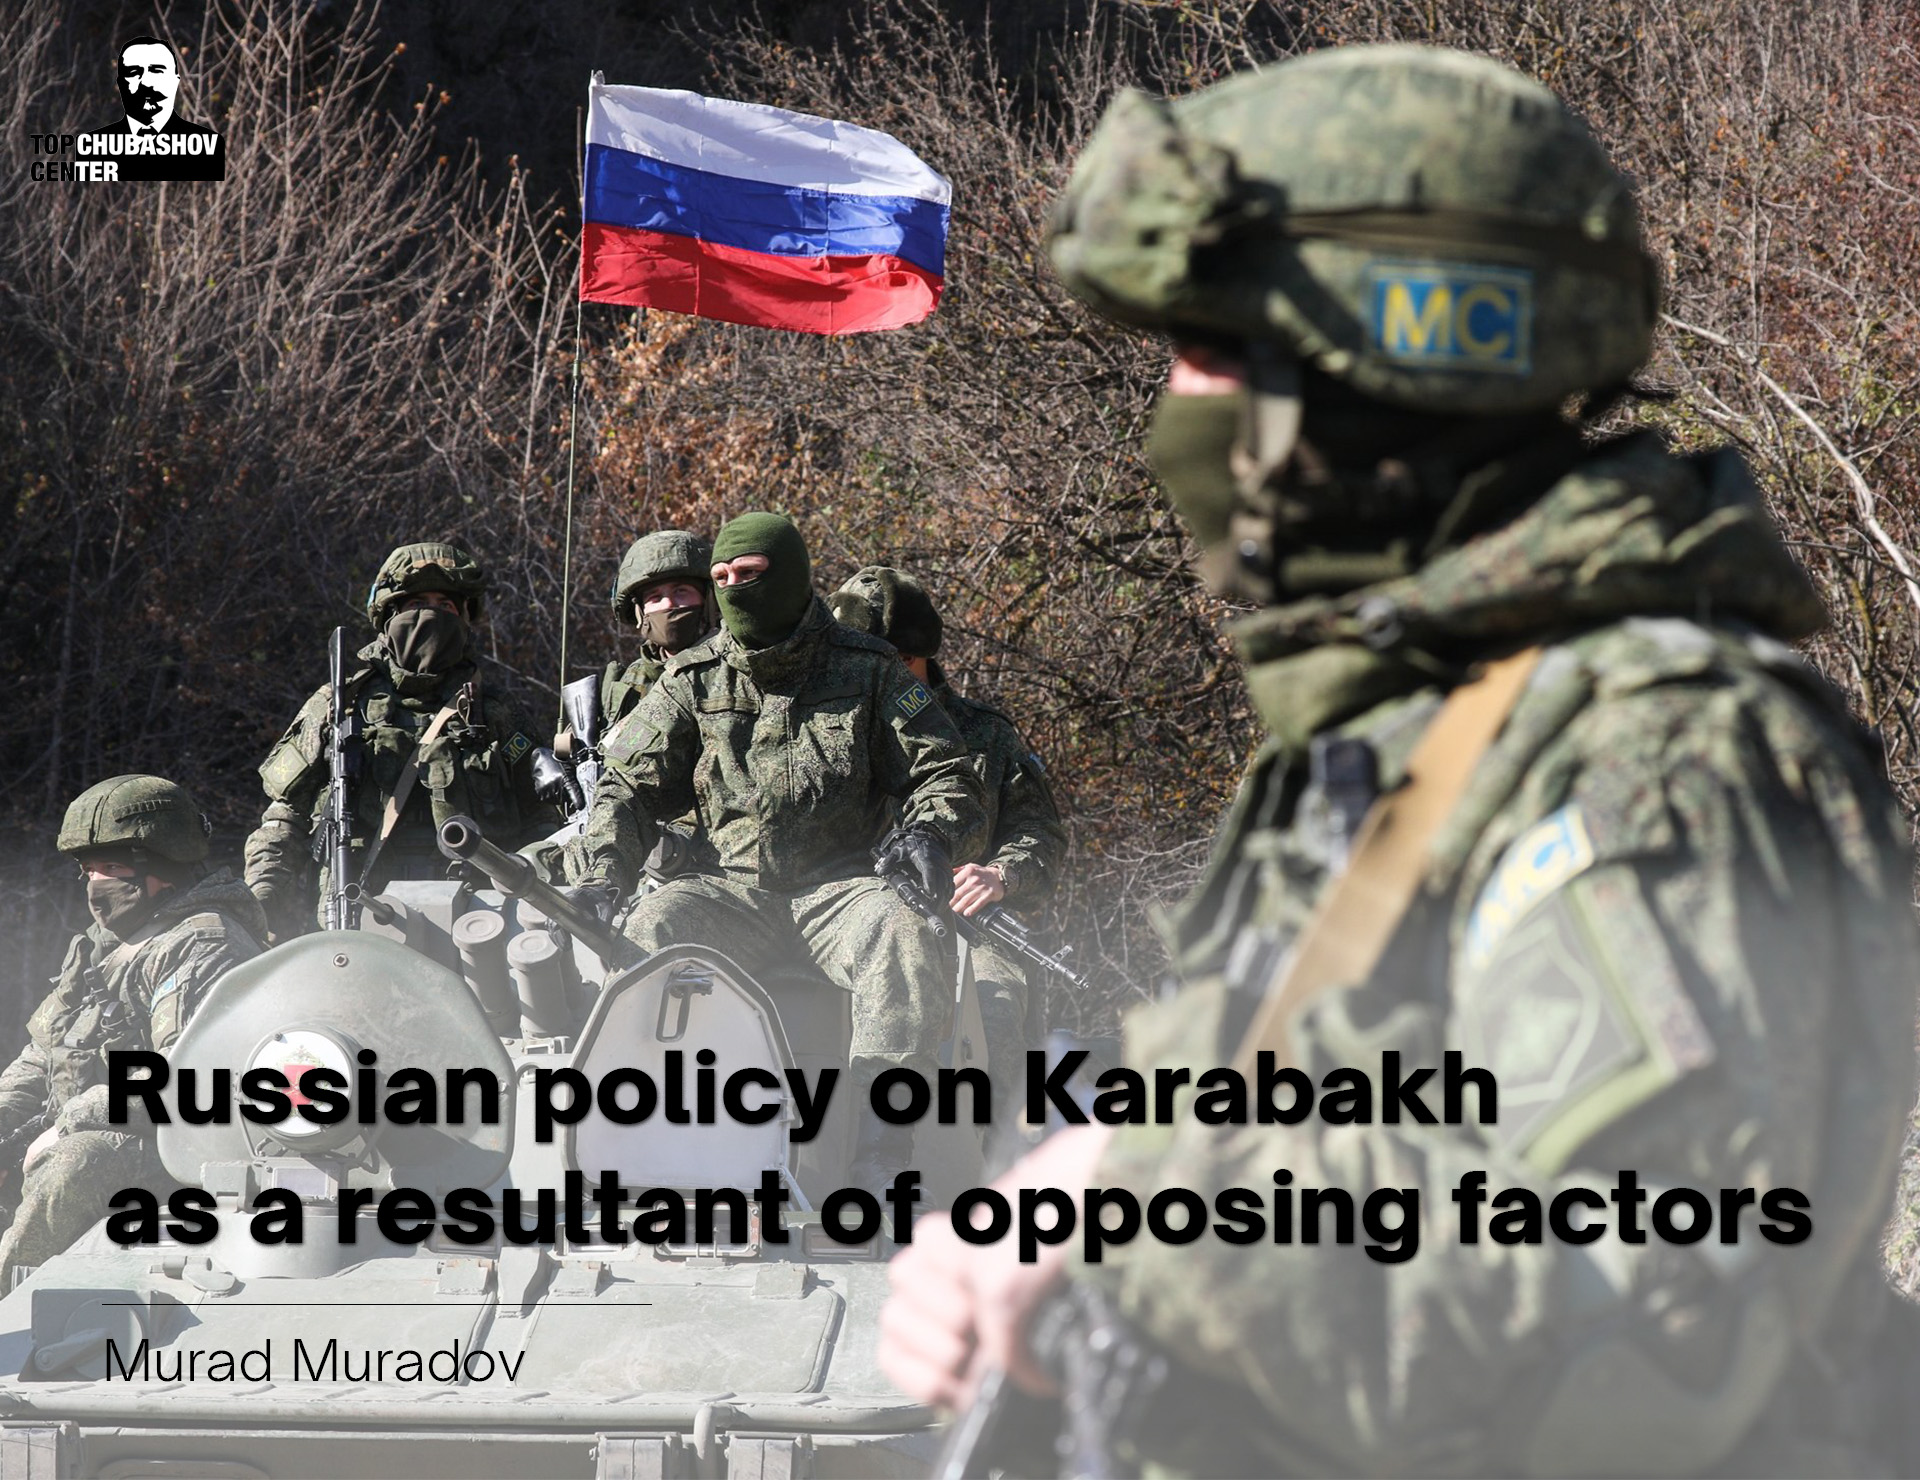 Russian policy on Karabakh as a resultant of opposing factors